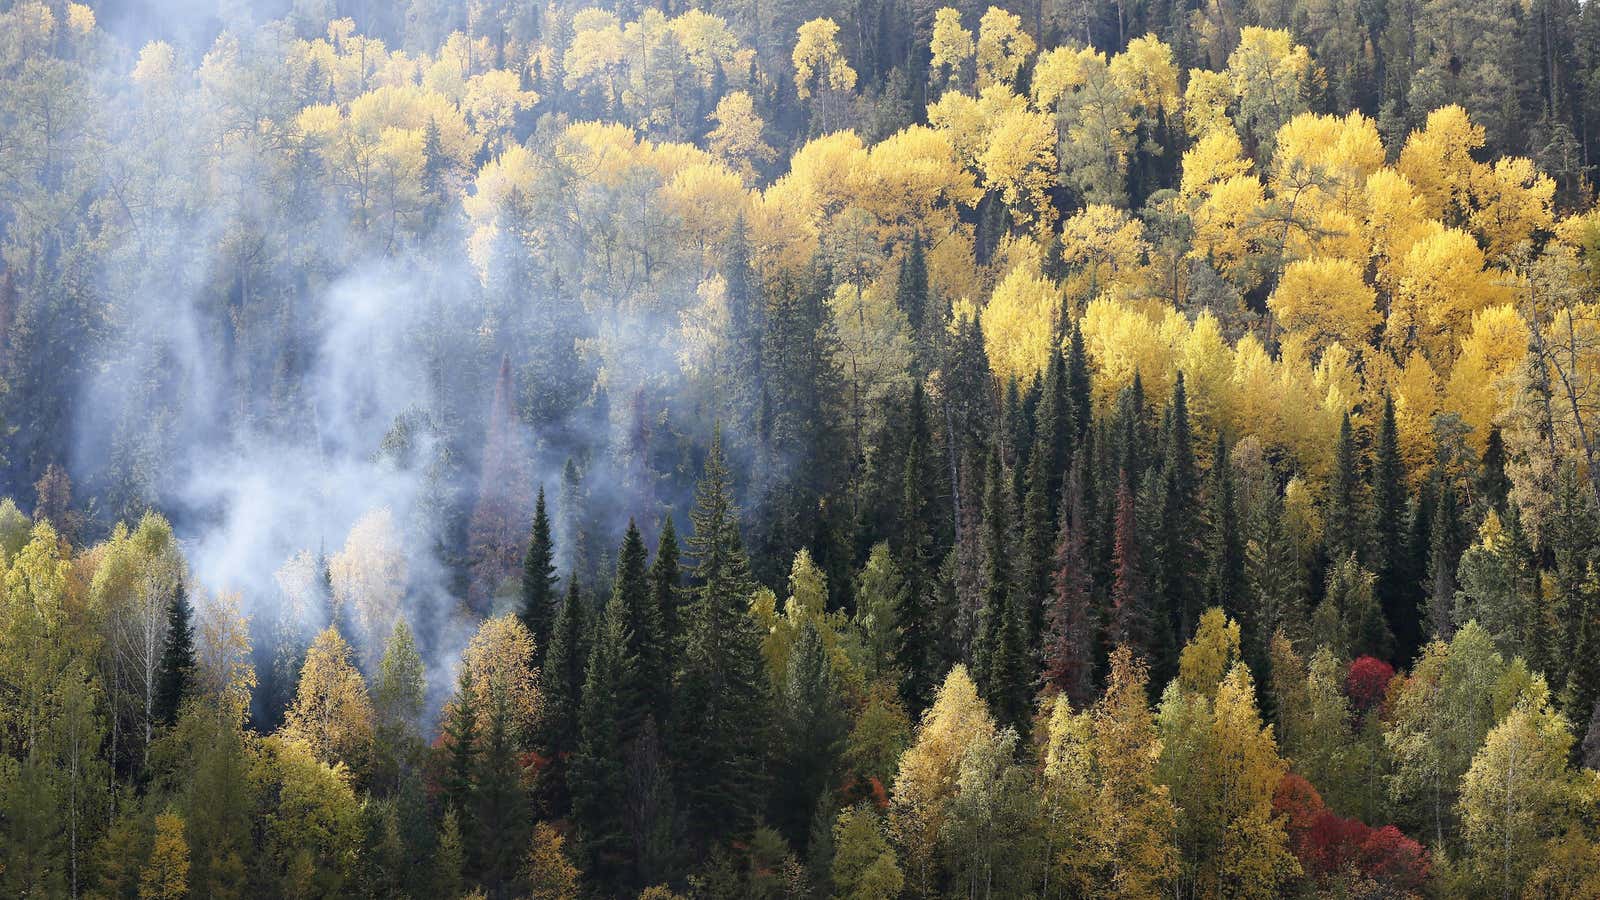 A forest on the bank of the Yenisei River. Siberia is one of the least densely populated places on Earth.